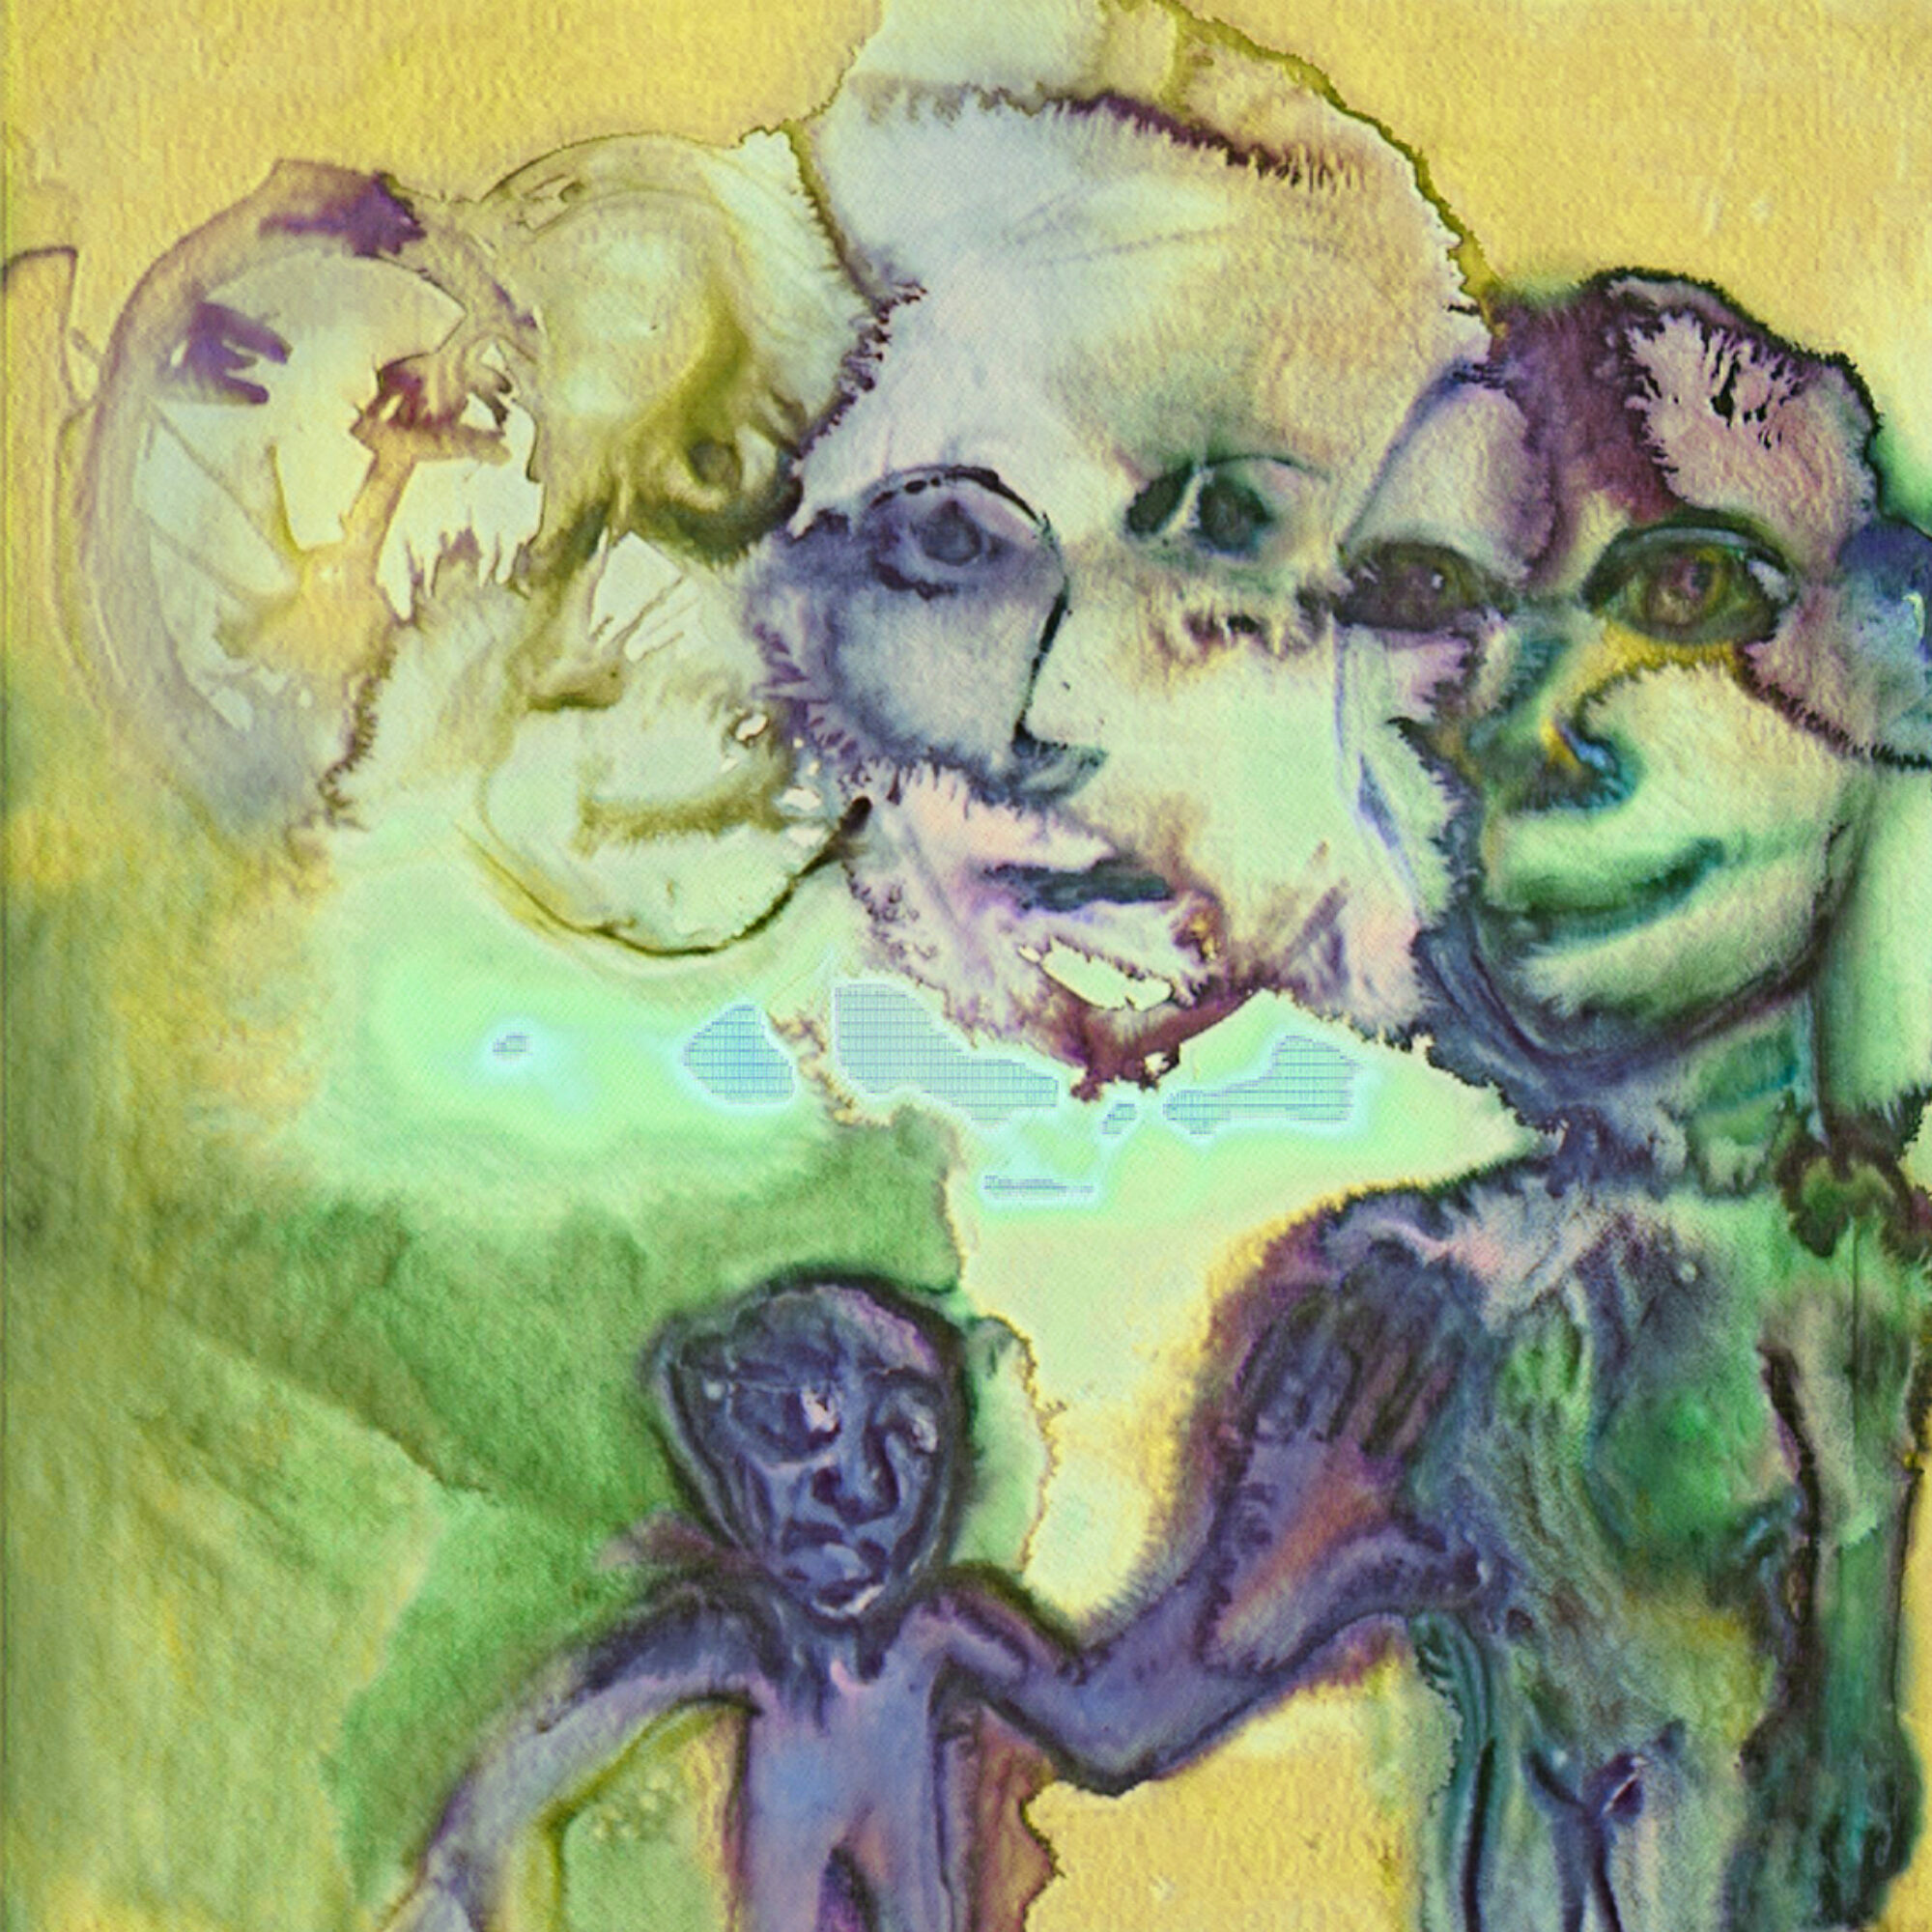 A green and yellow watercolour illustration of faces and bodies merging together